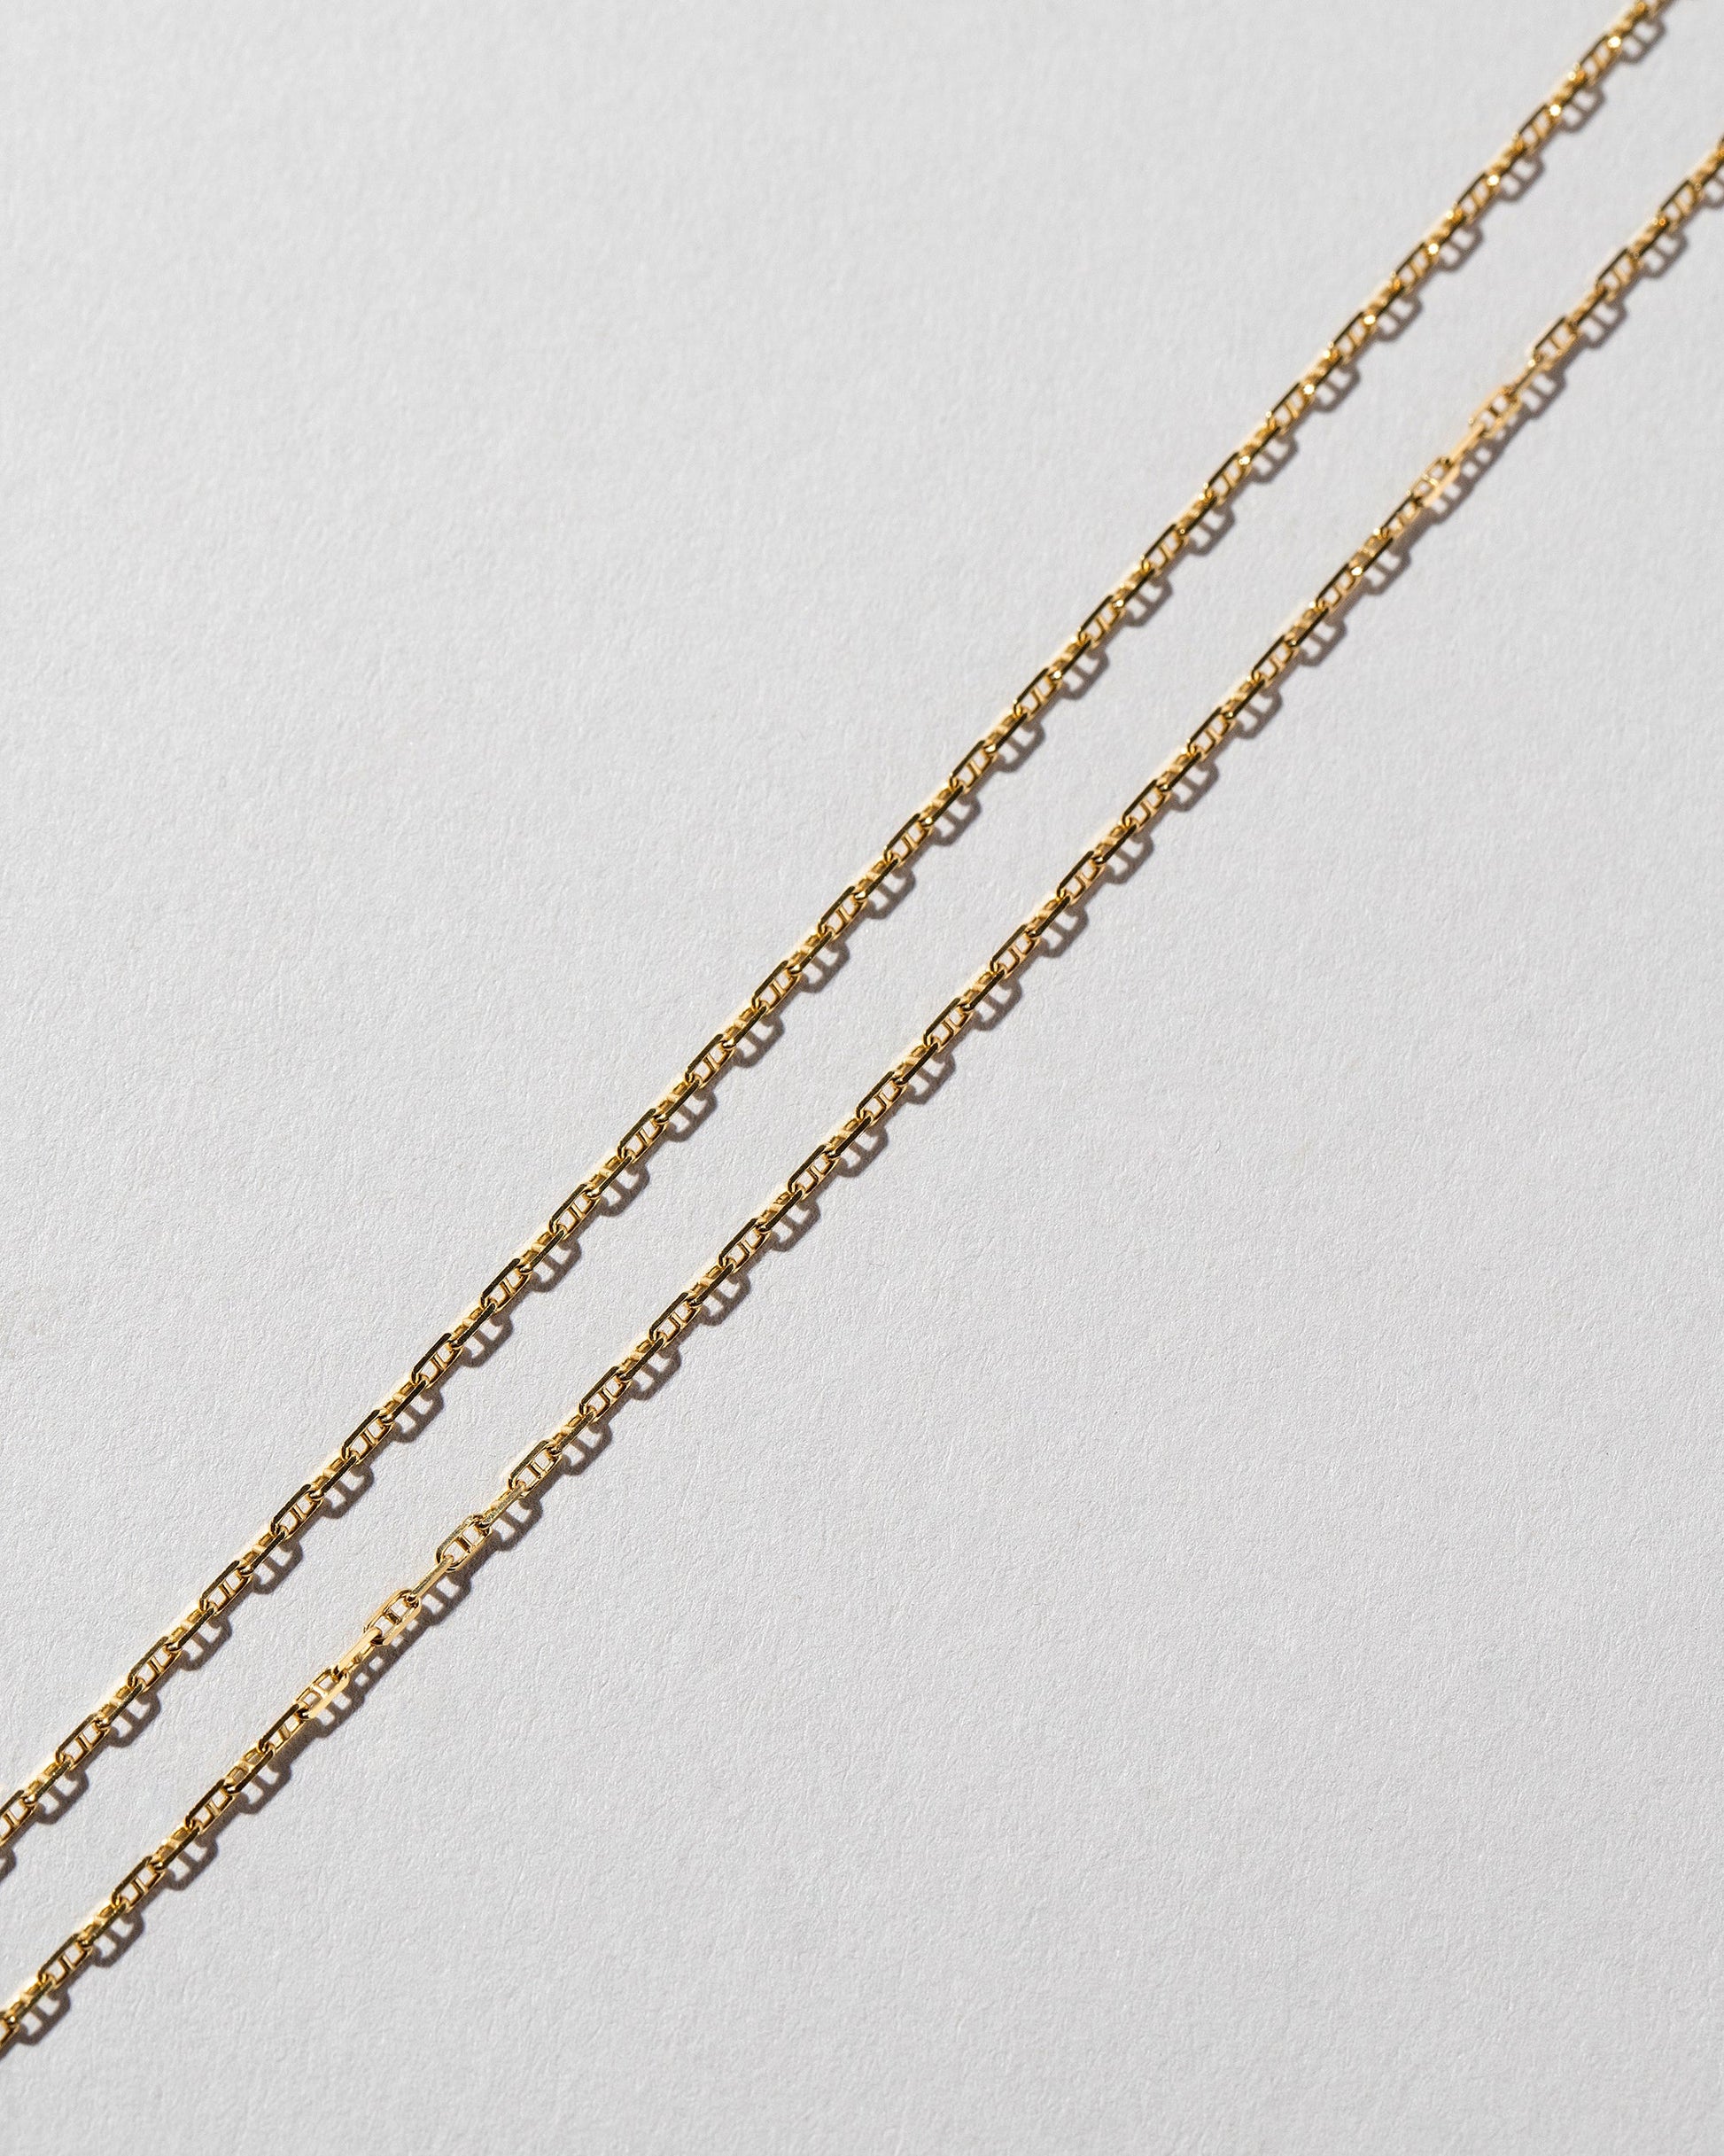 Diamond-Cut 1 mm Bead Chain 7Bracelet 16 18 20 24 Necklace 14K Yellow White Rose Gold 14K Rose Gold / 20 Necklace